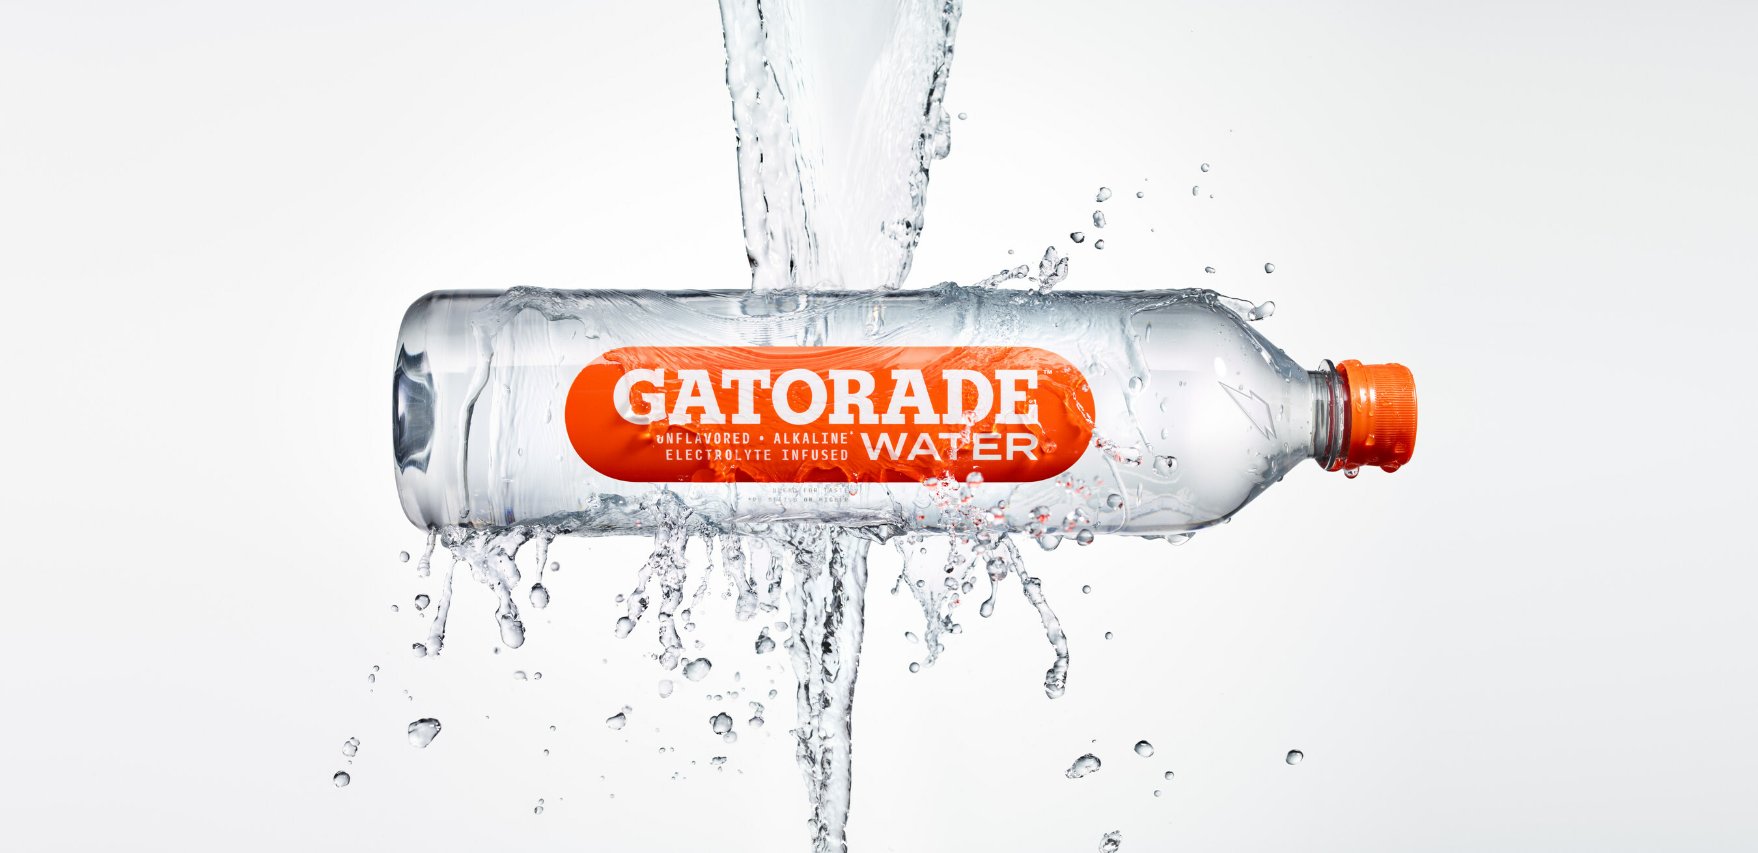 Gatorade Introduces Electrolyte-Infused Water